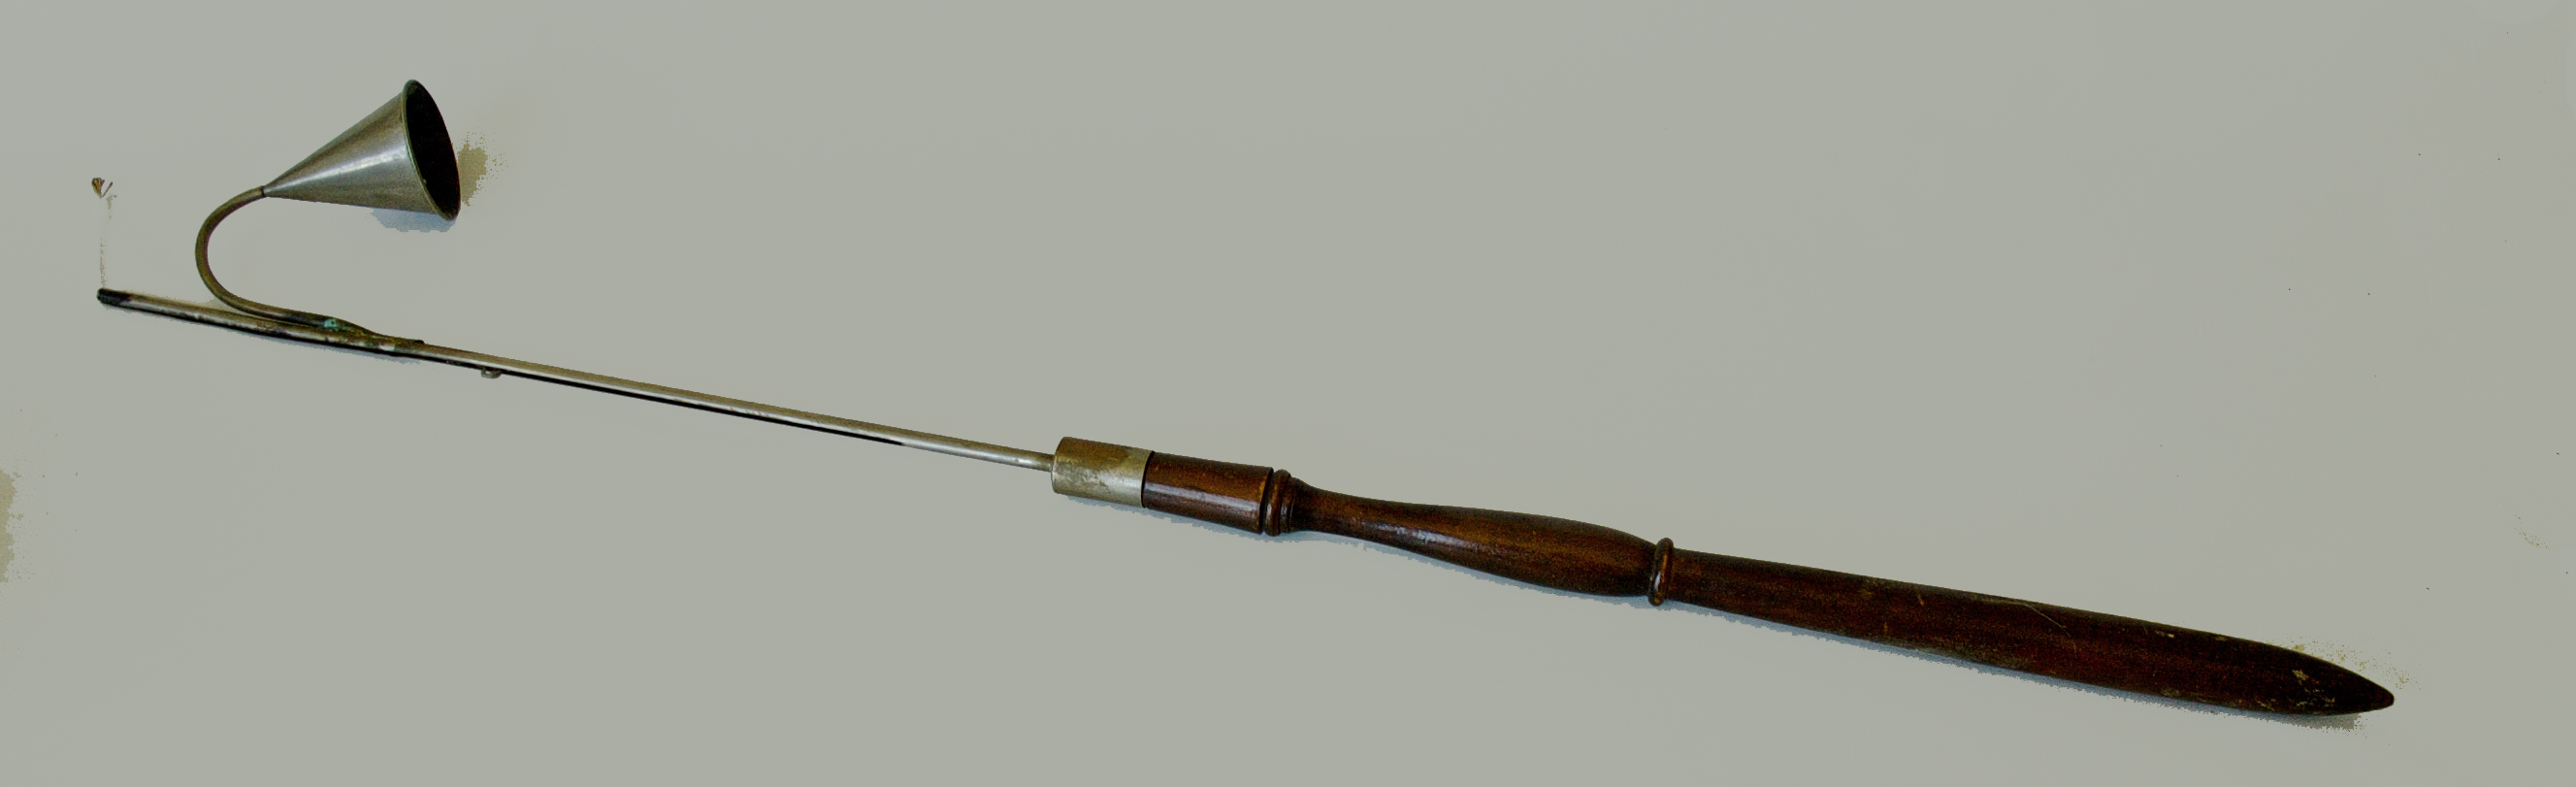 A candle snuffer with a wooden handle